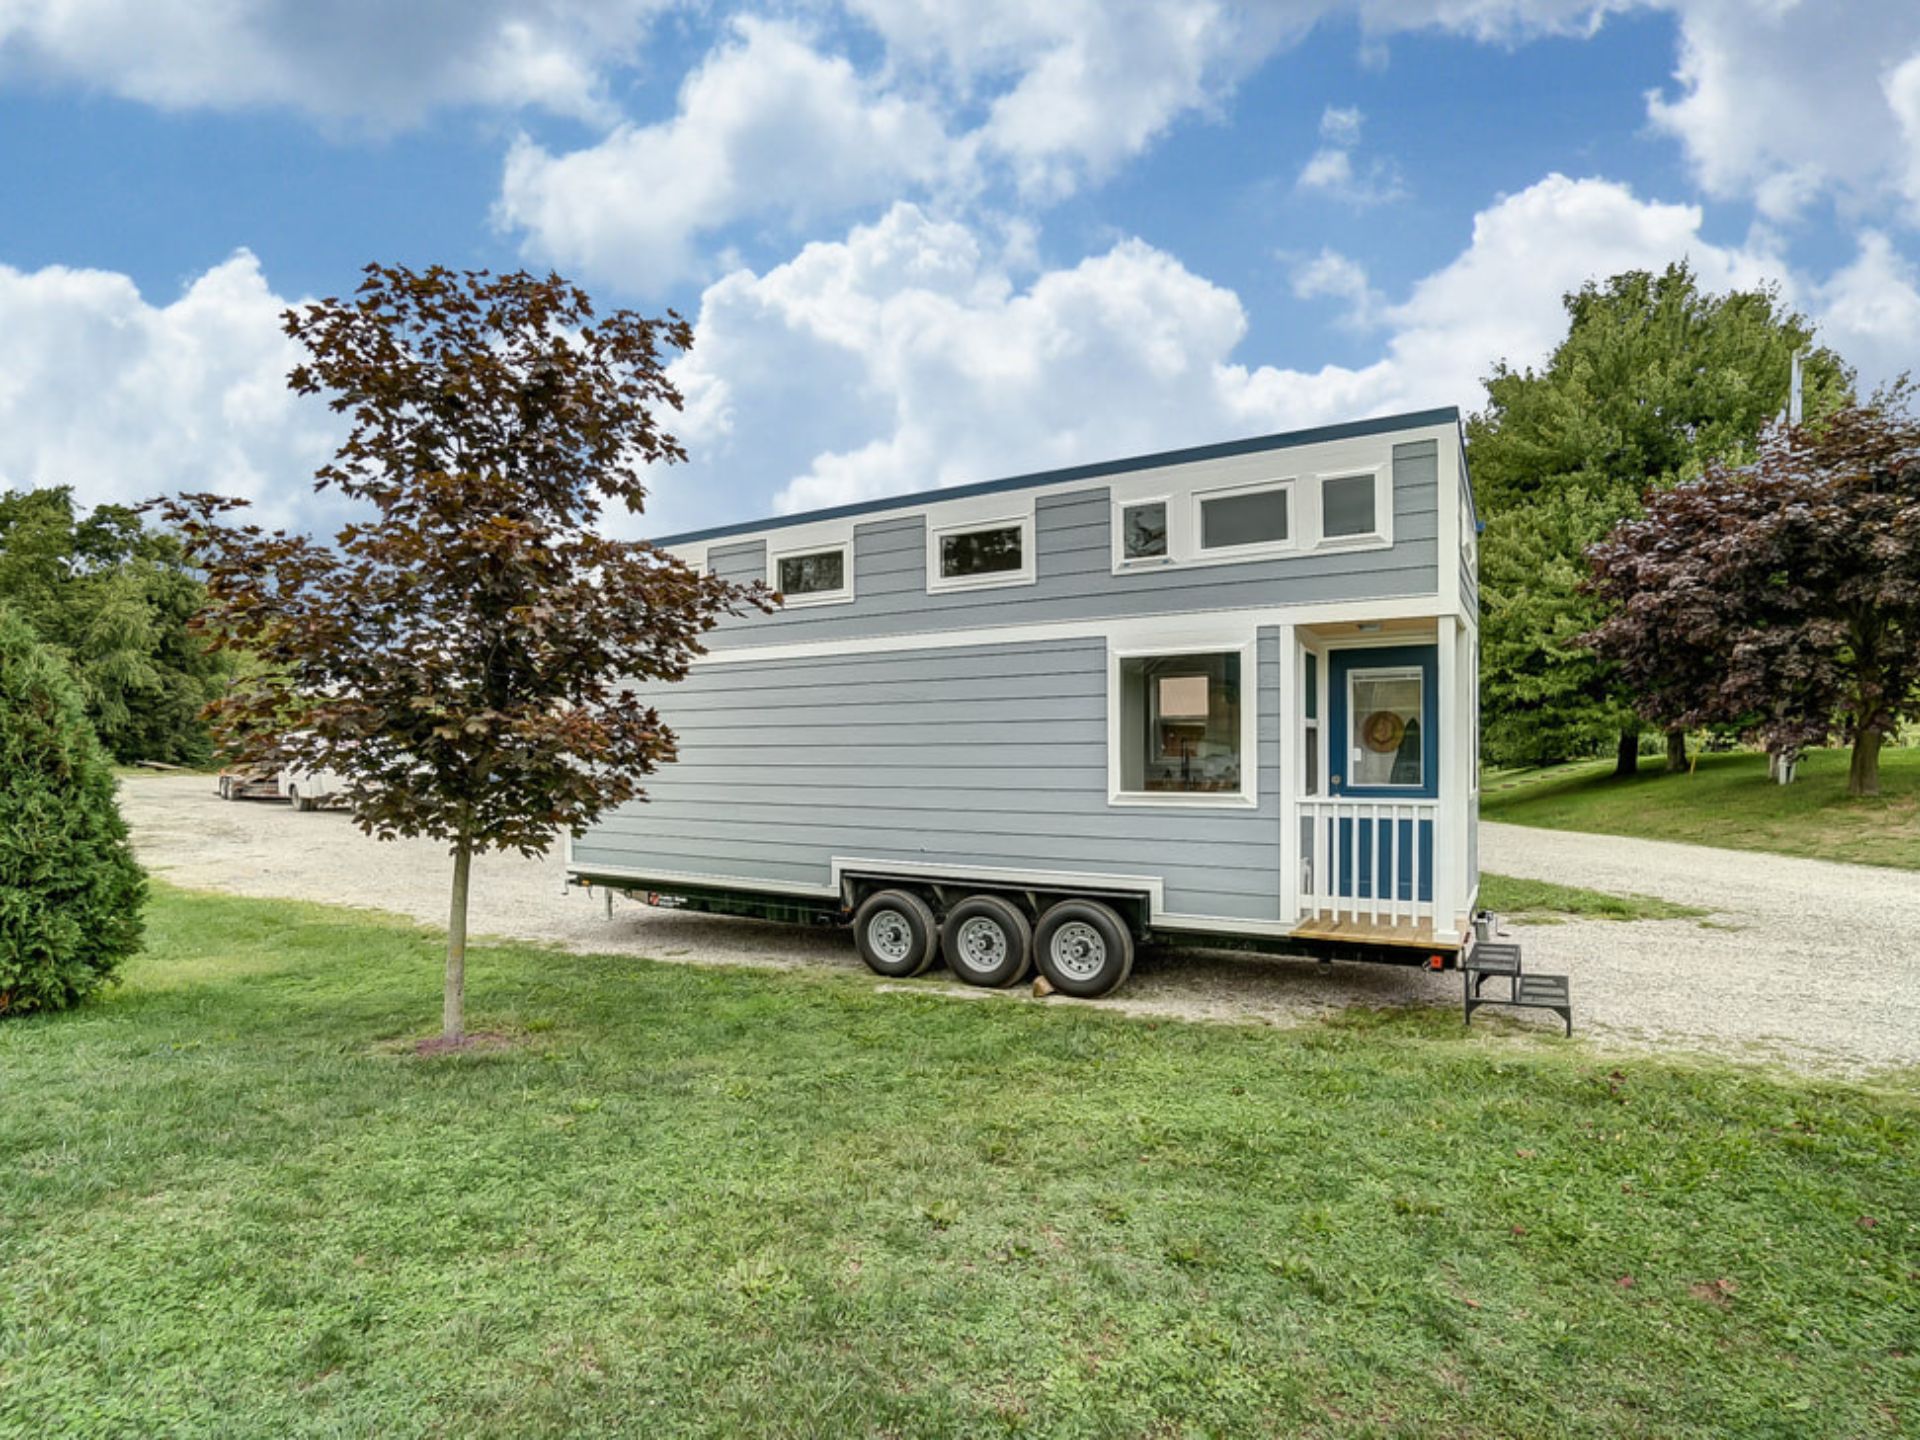 Experience Cozy Living Anywhere You Like In This Tiny House On Wheels